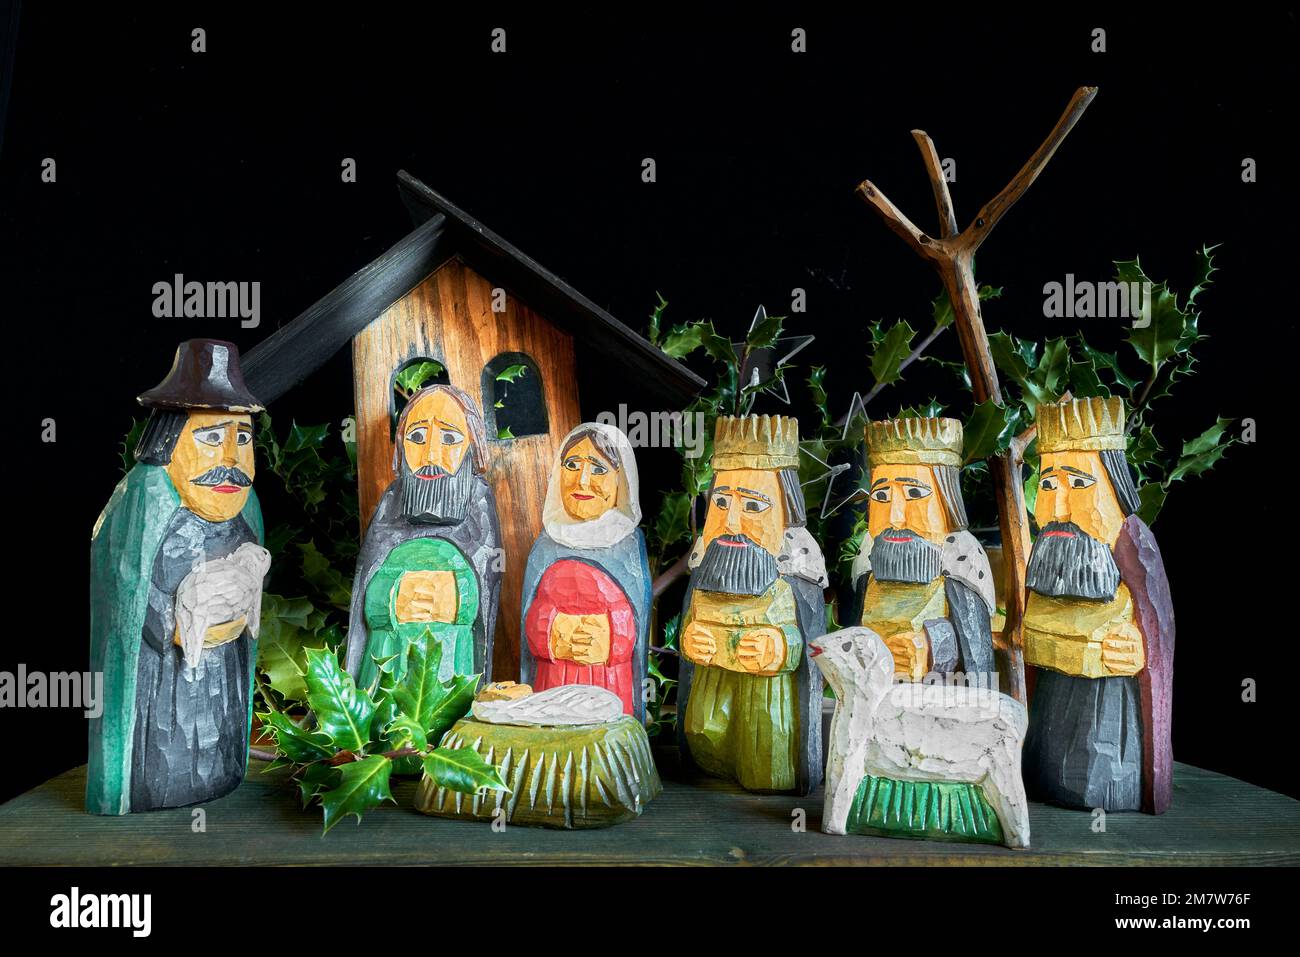 Crib - of a shepherd holding a lamb, and three magi holding gold frankincense and myrrh, gifts for the new-born Jesus Christ, son of Mary and Joseph. Stock Photo